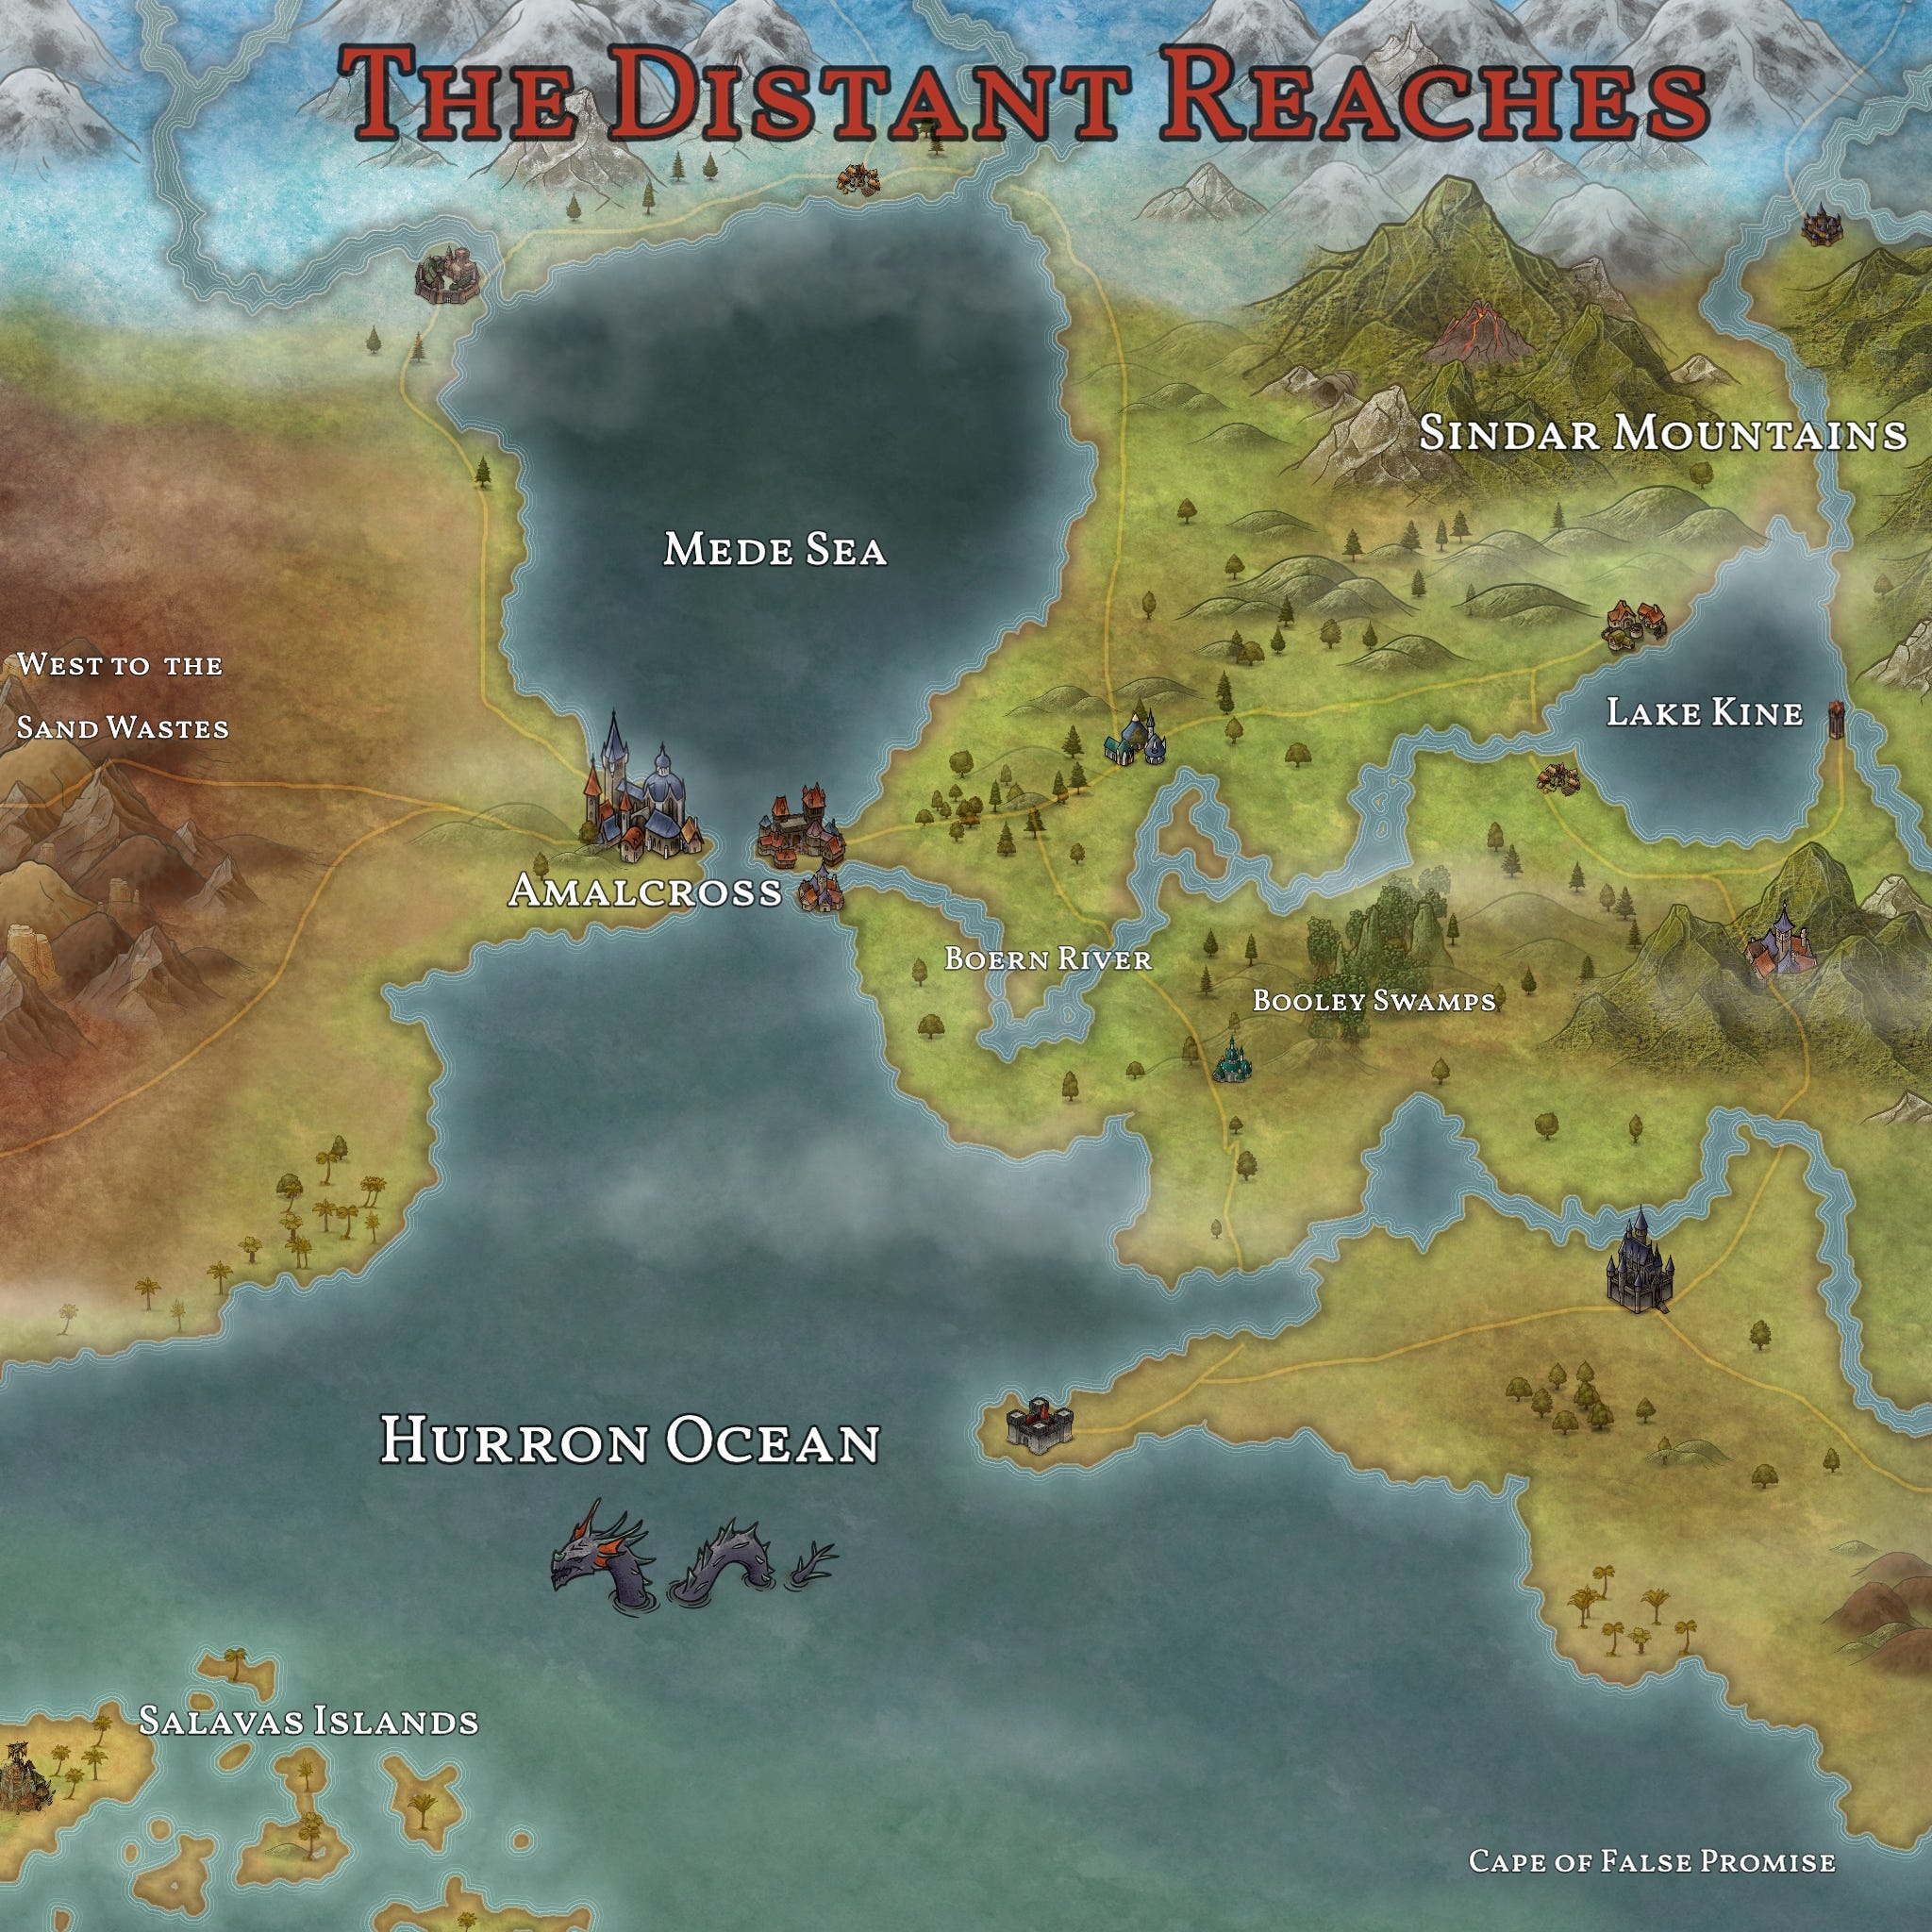 Map of the Distant Reaches for the Ballads of the Distant Reaches fantasy short stories.